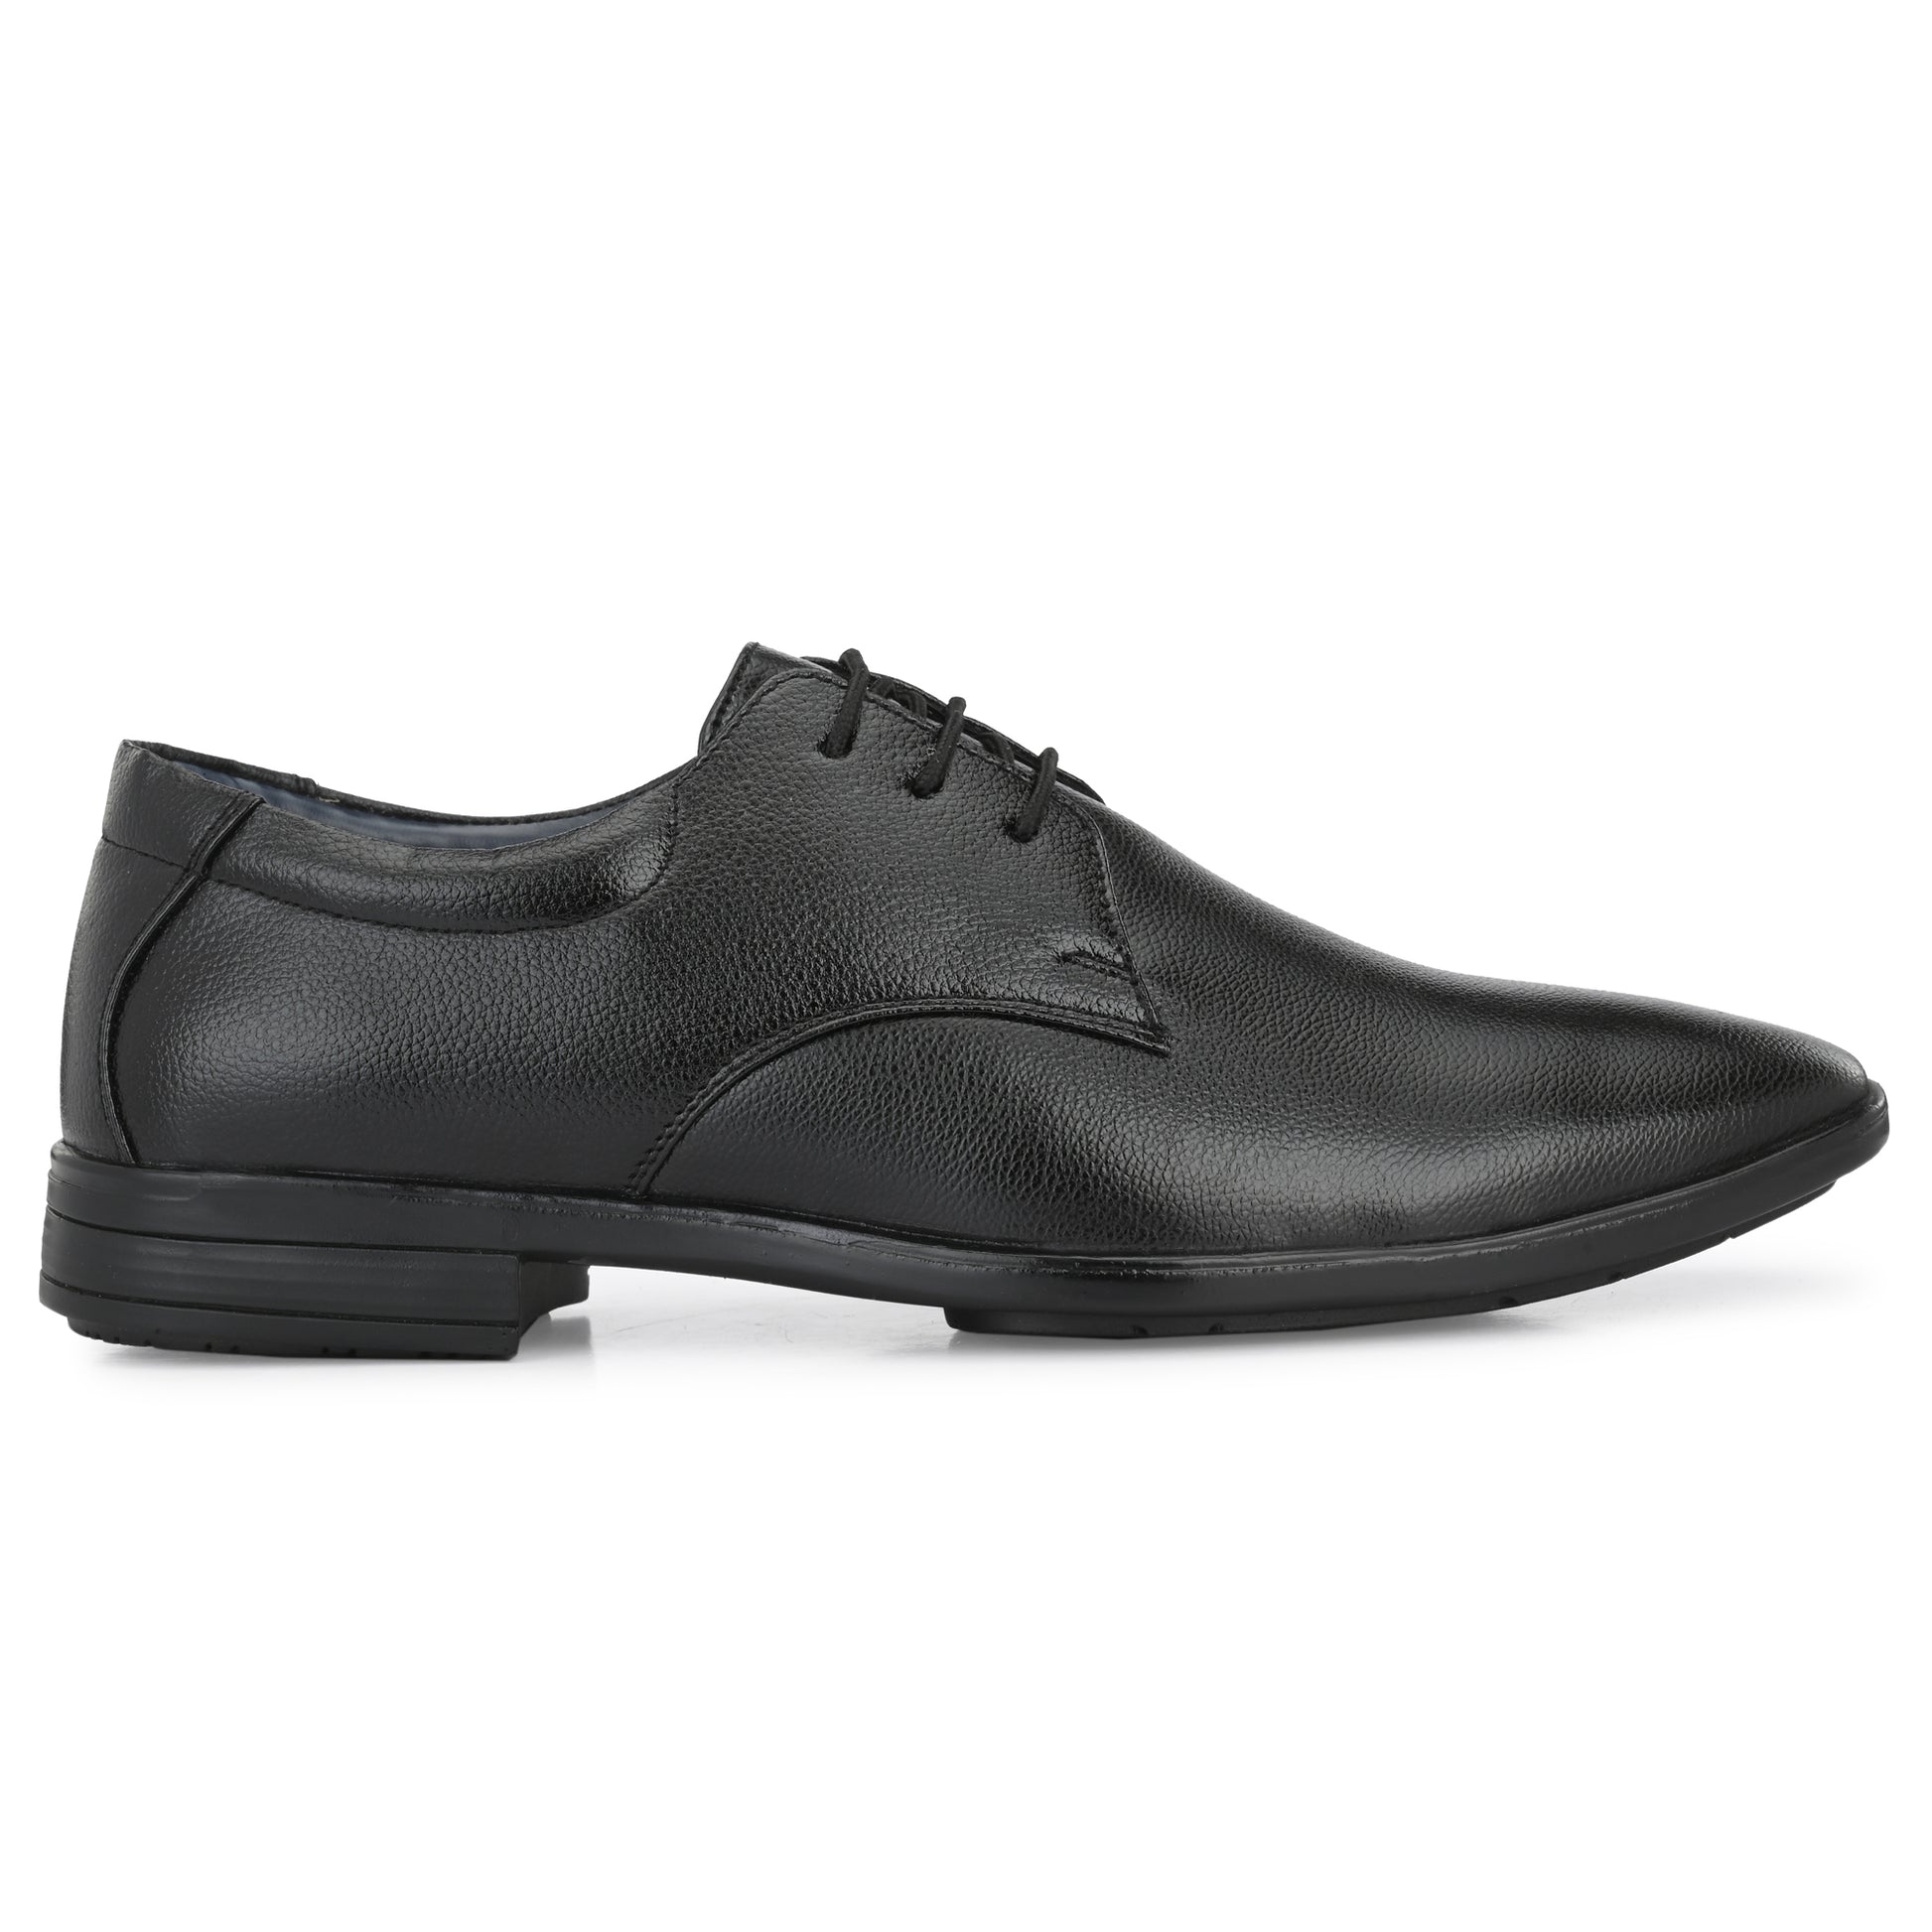 HNR Corporation Toro Blu Leather Formal Shoes HNR Corporation 899.00 Toro Blu 10UK Toro Blu Leather Formal Shoes